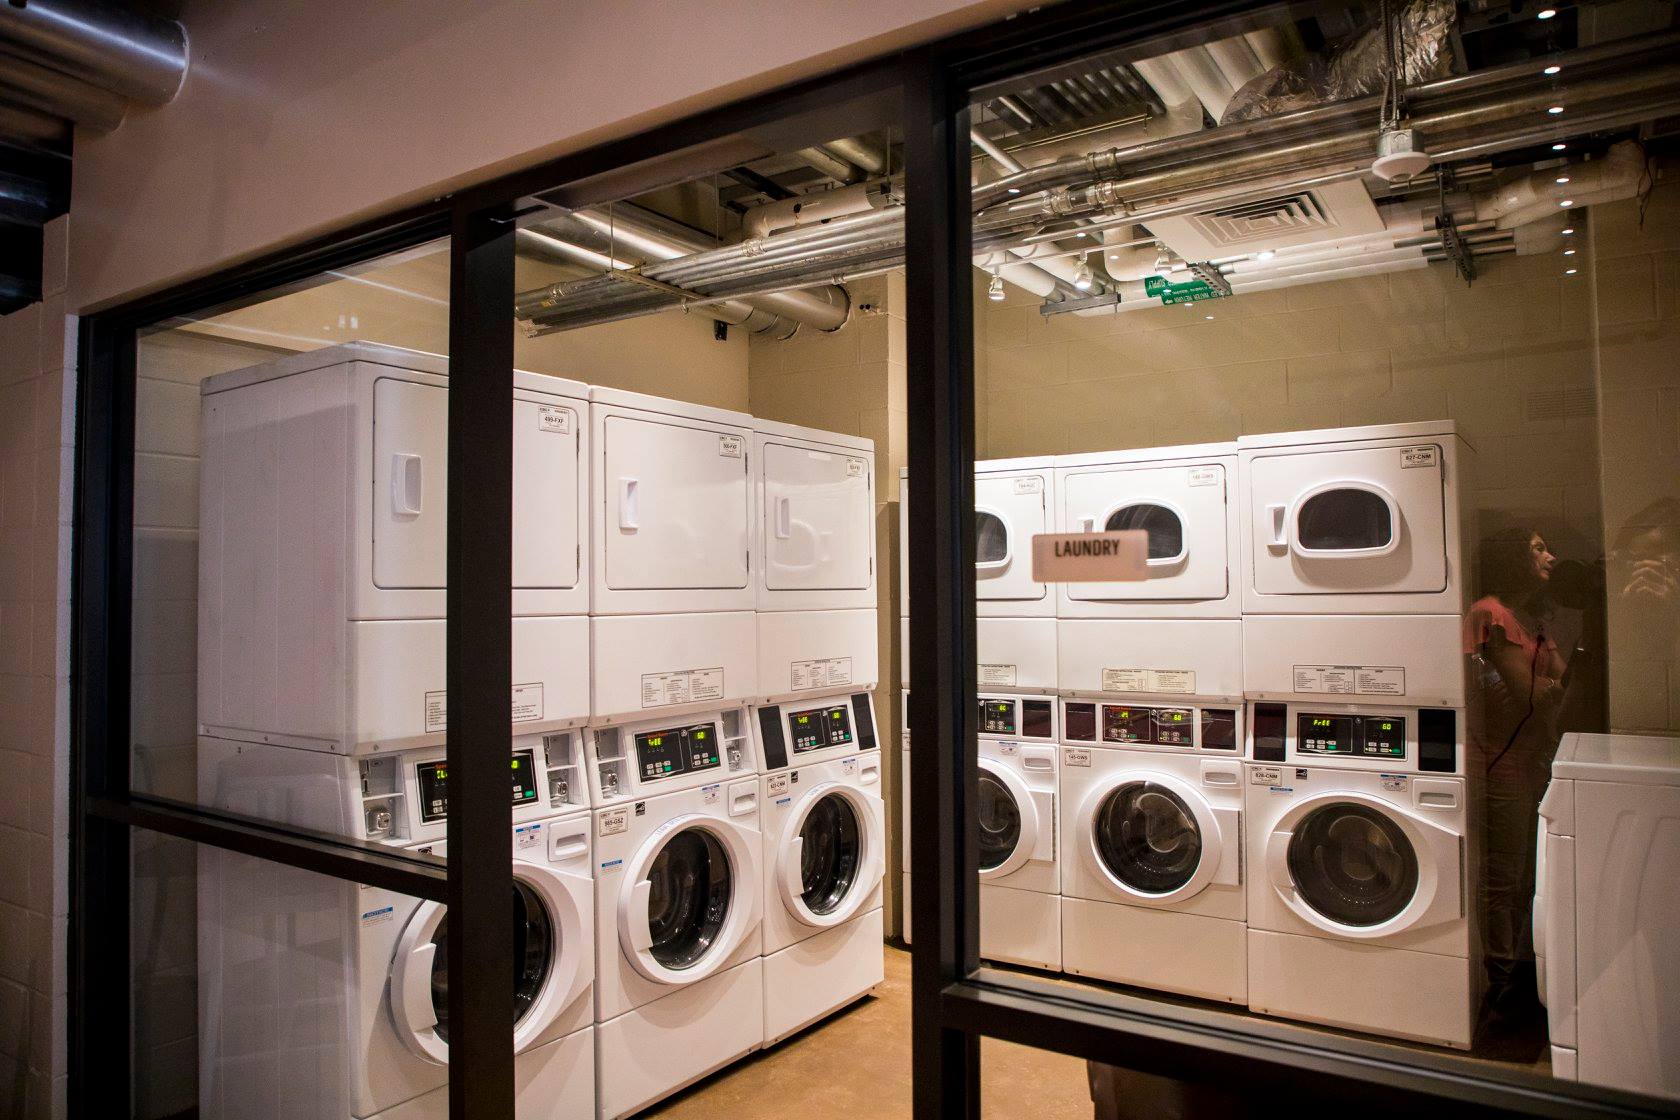 The laundry station is filled with brand new appliances ready for student use.